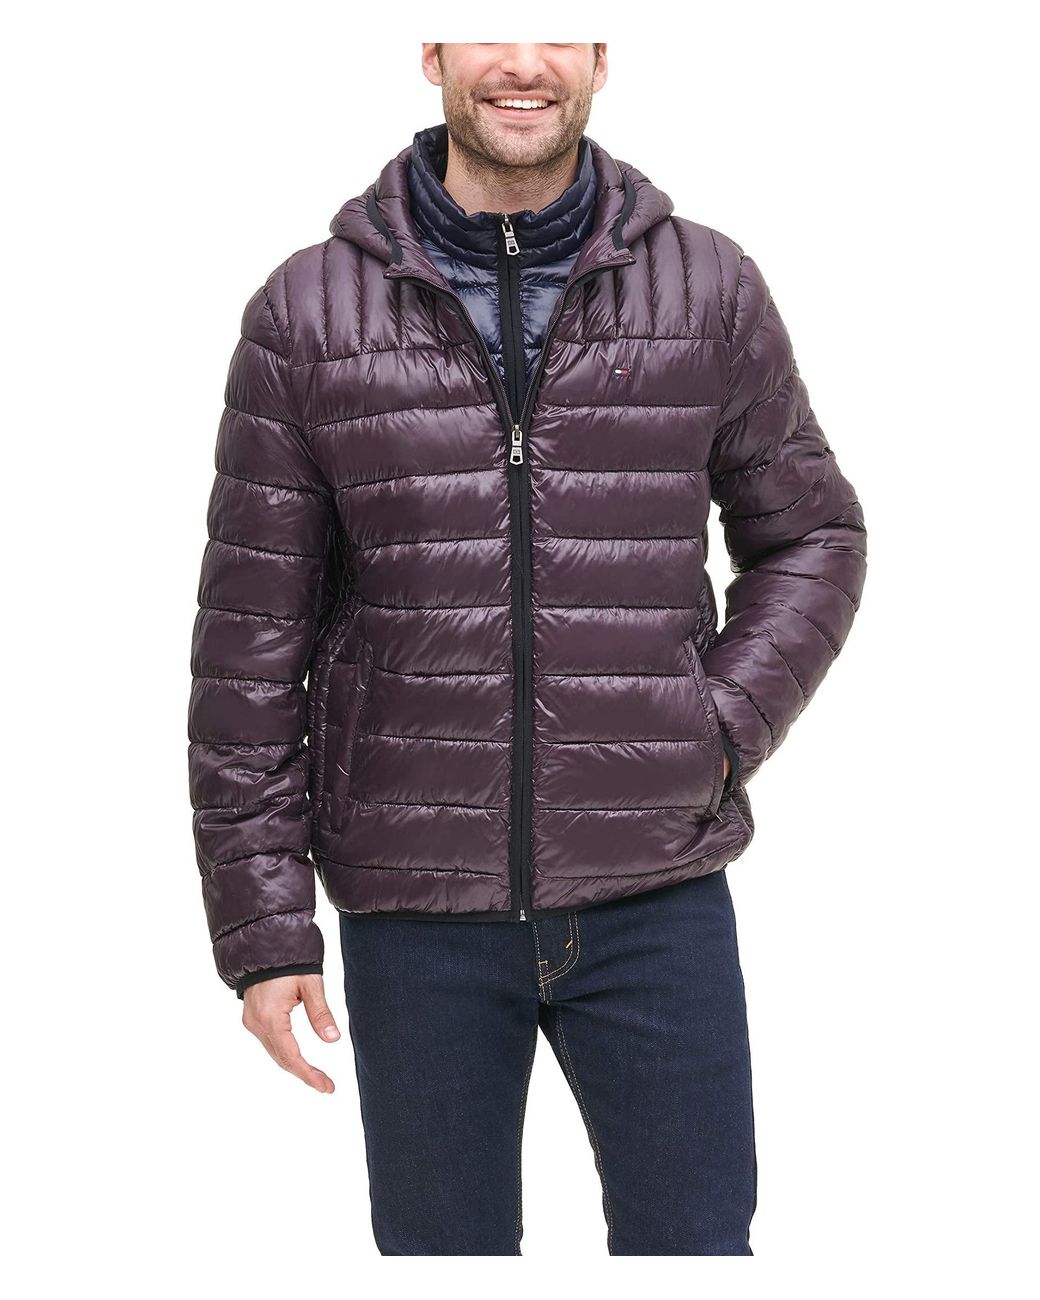 Tommy Hilfiger Mens Insulated Packable Jacket With Contrast Bib and Hood 